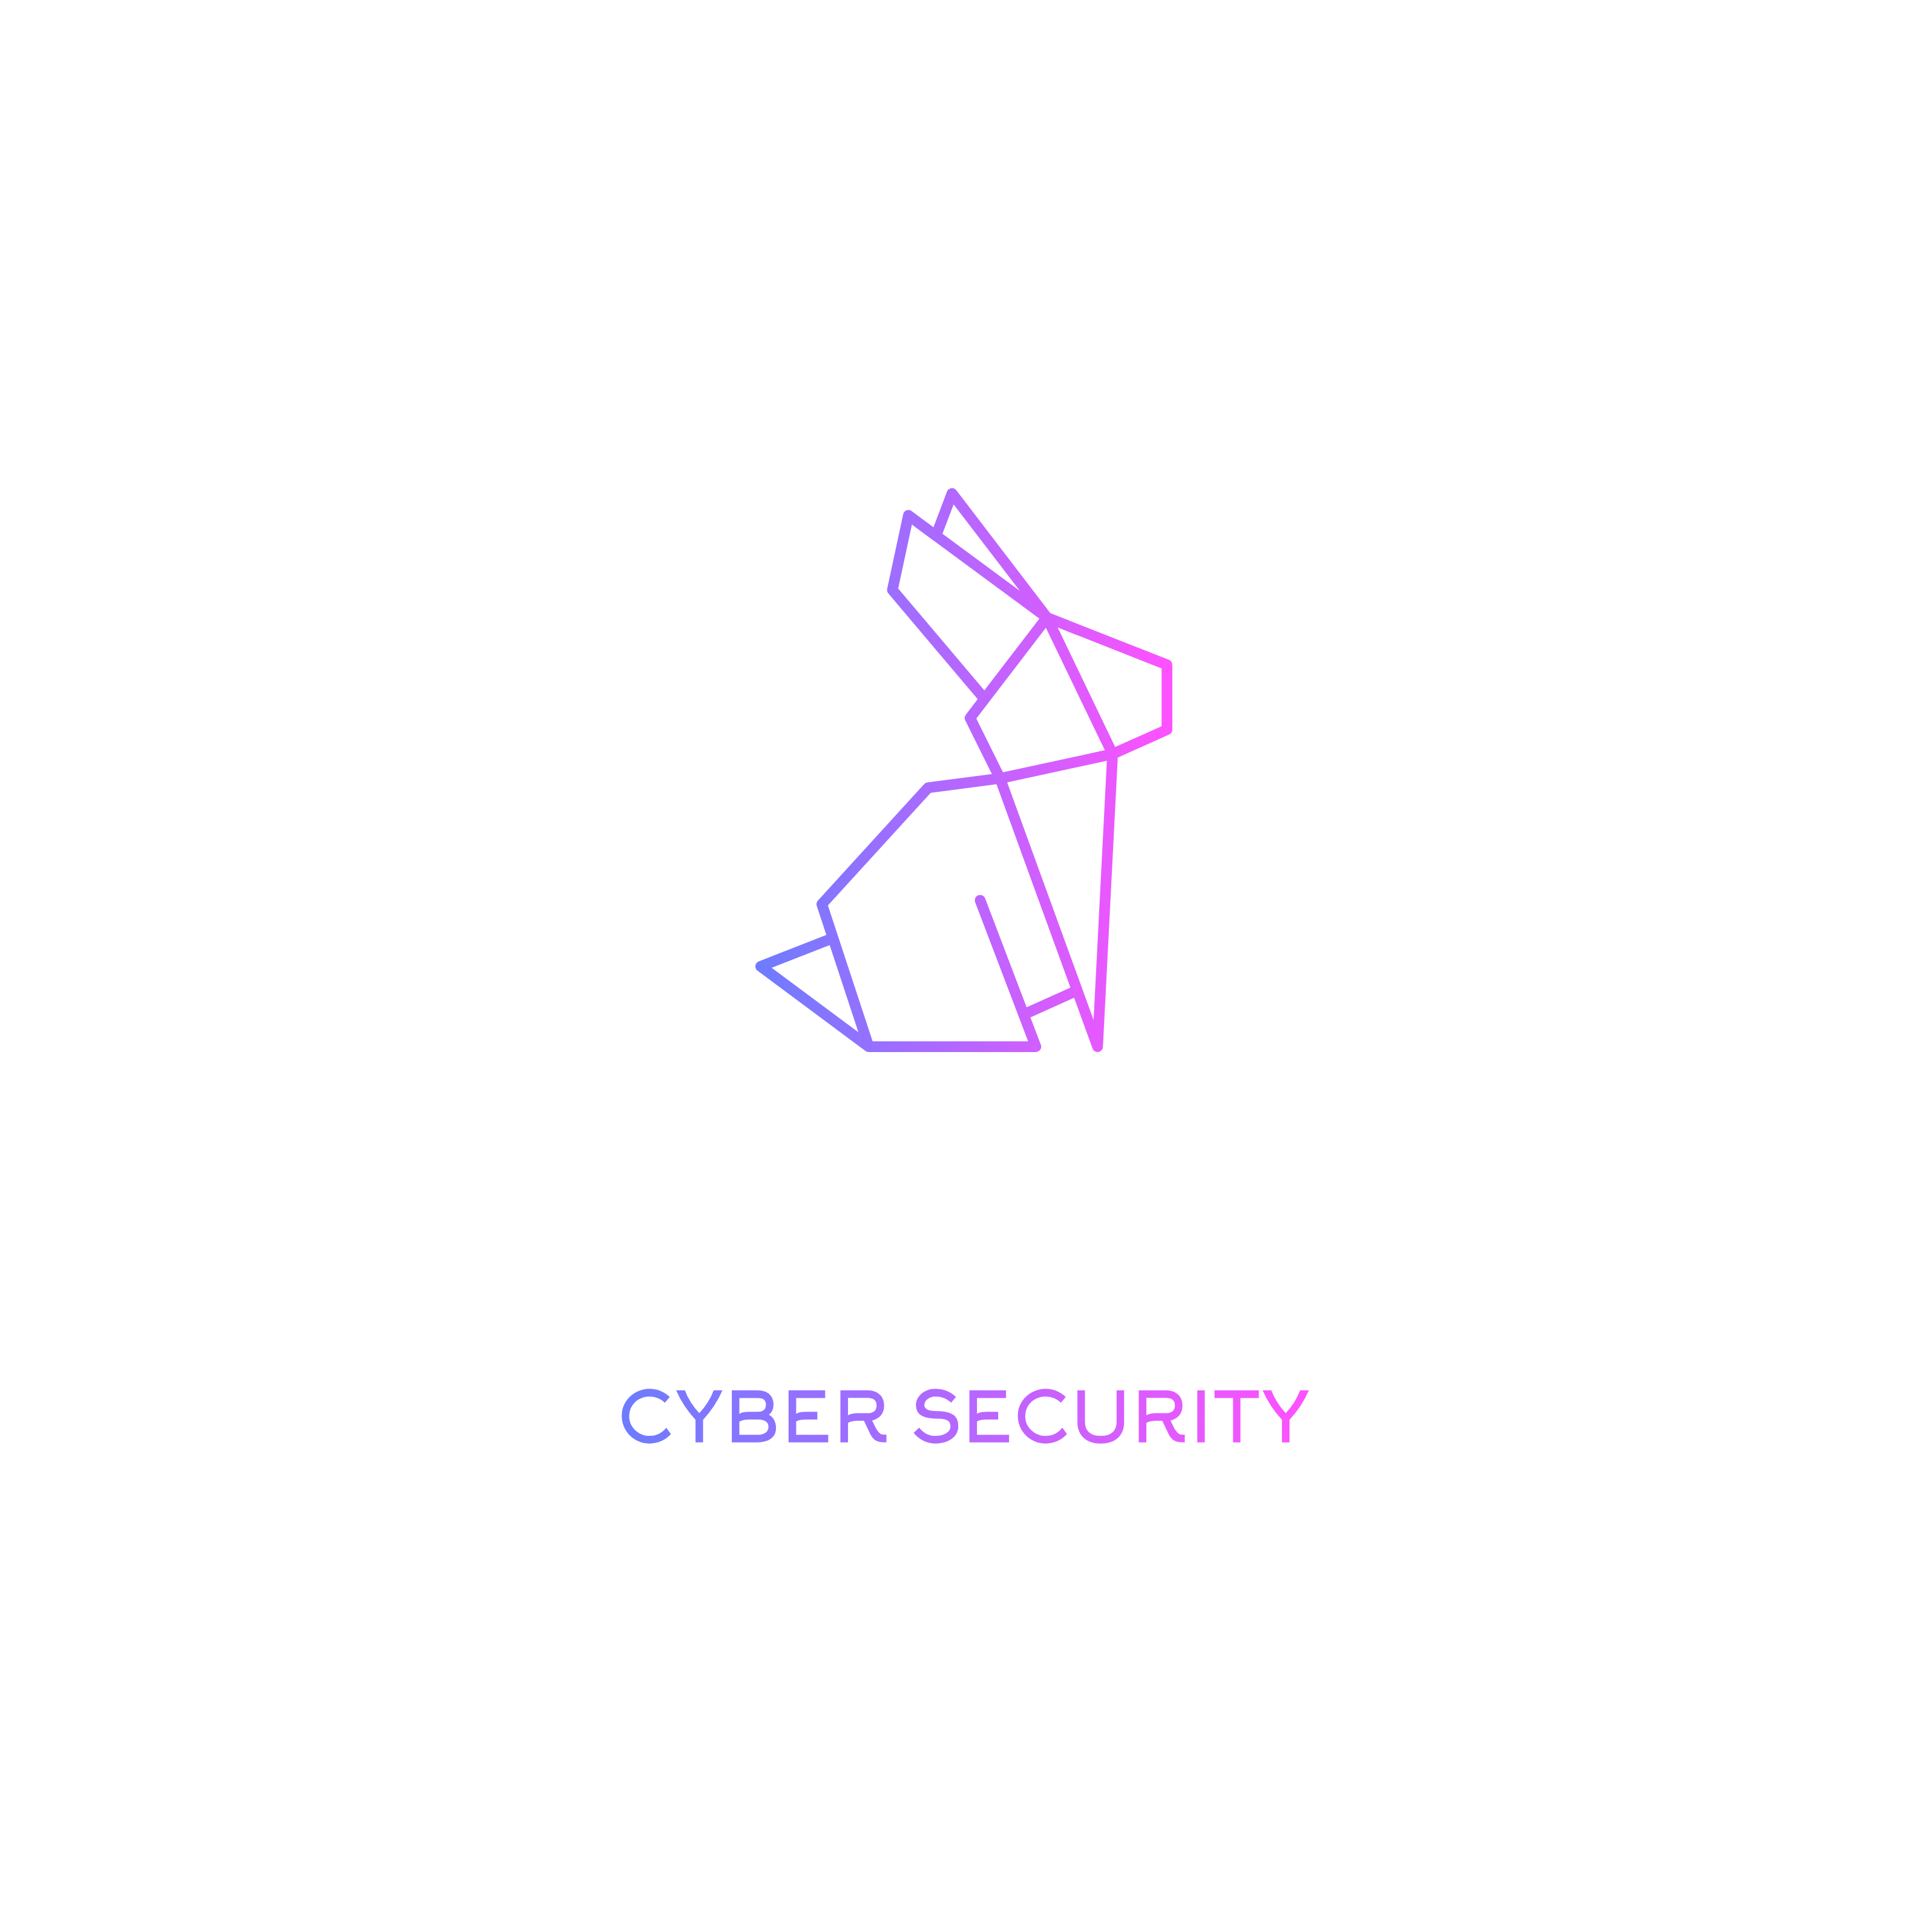 Cipherspace